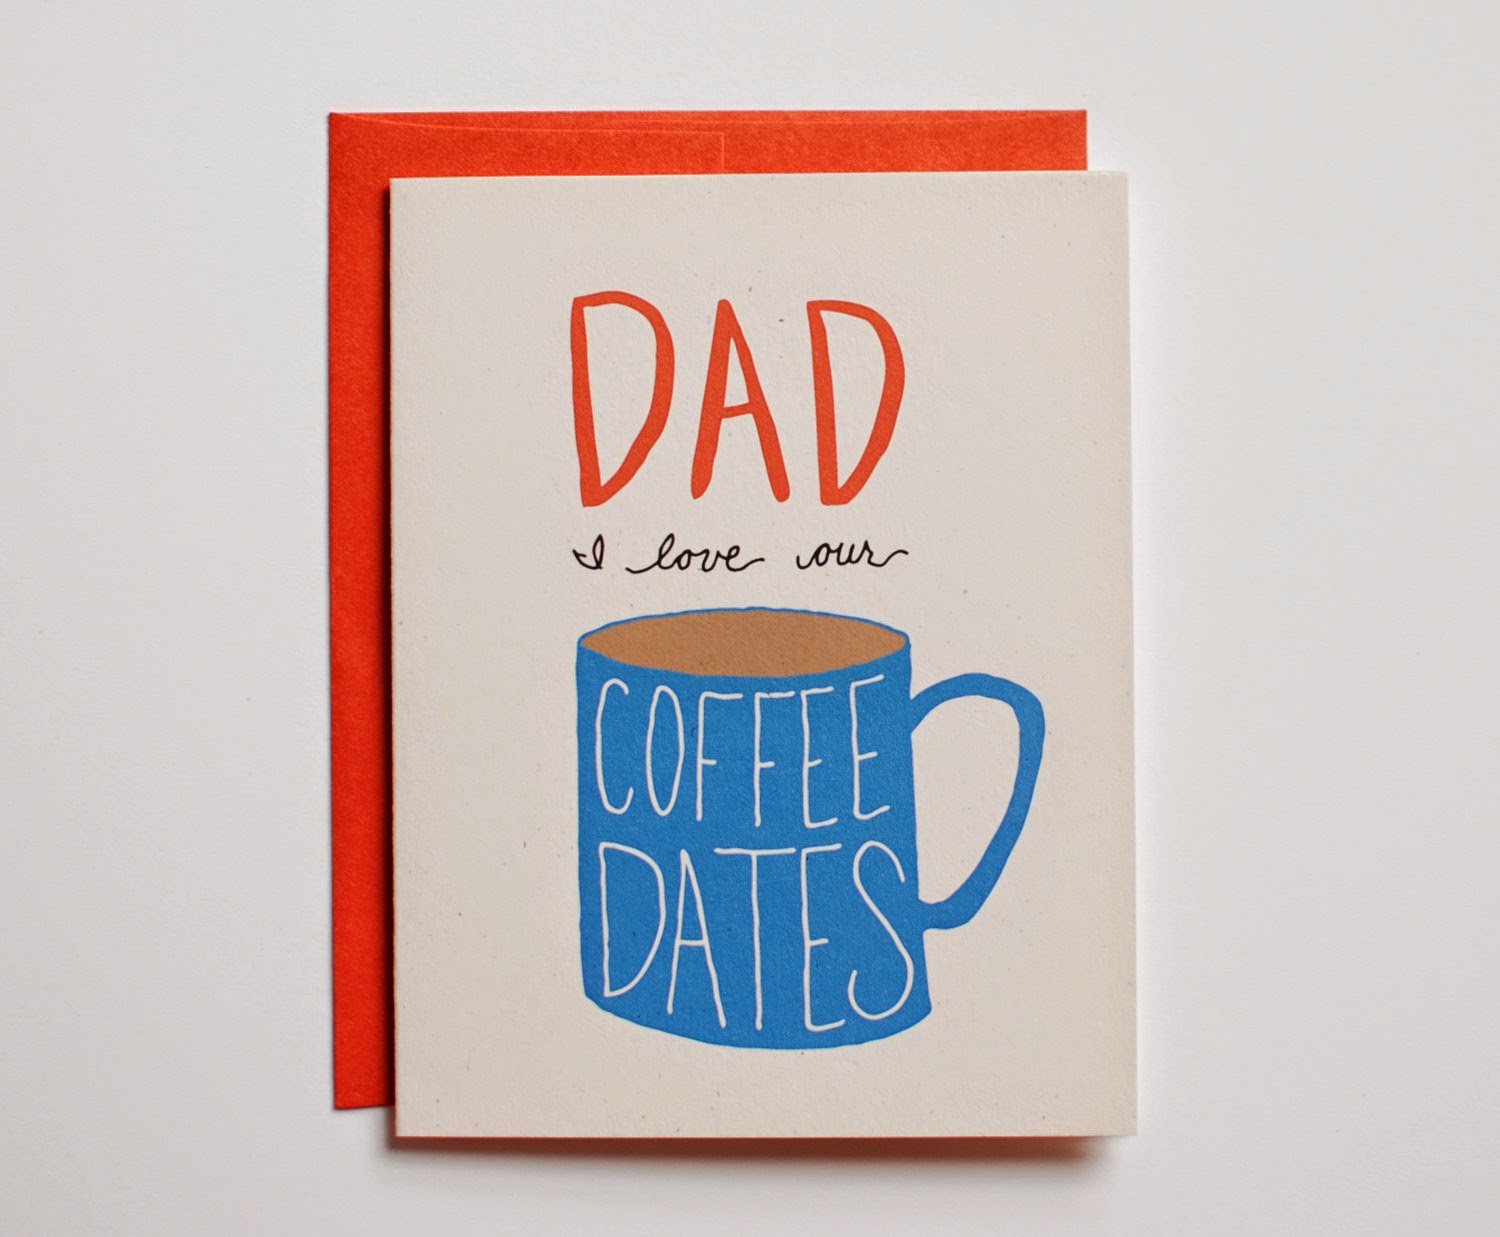 https://www.etsy.com/listing/188743631/fathers-day-card-fathers-day-card-card?ref=shop_home_feat_4